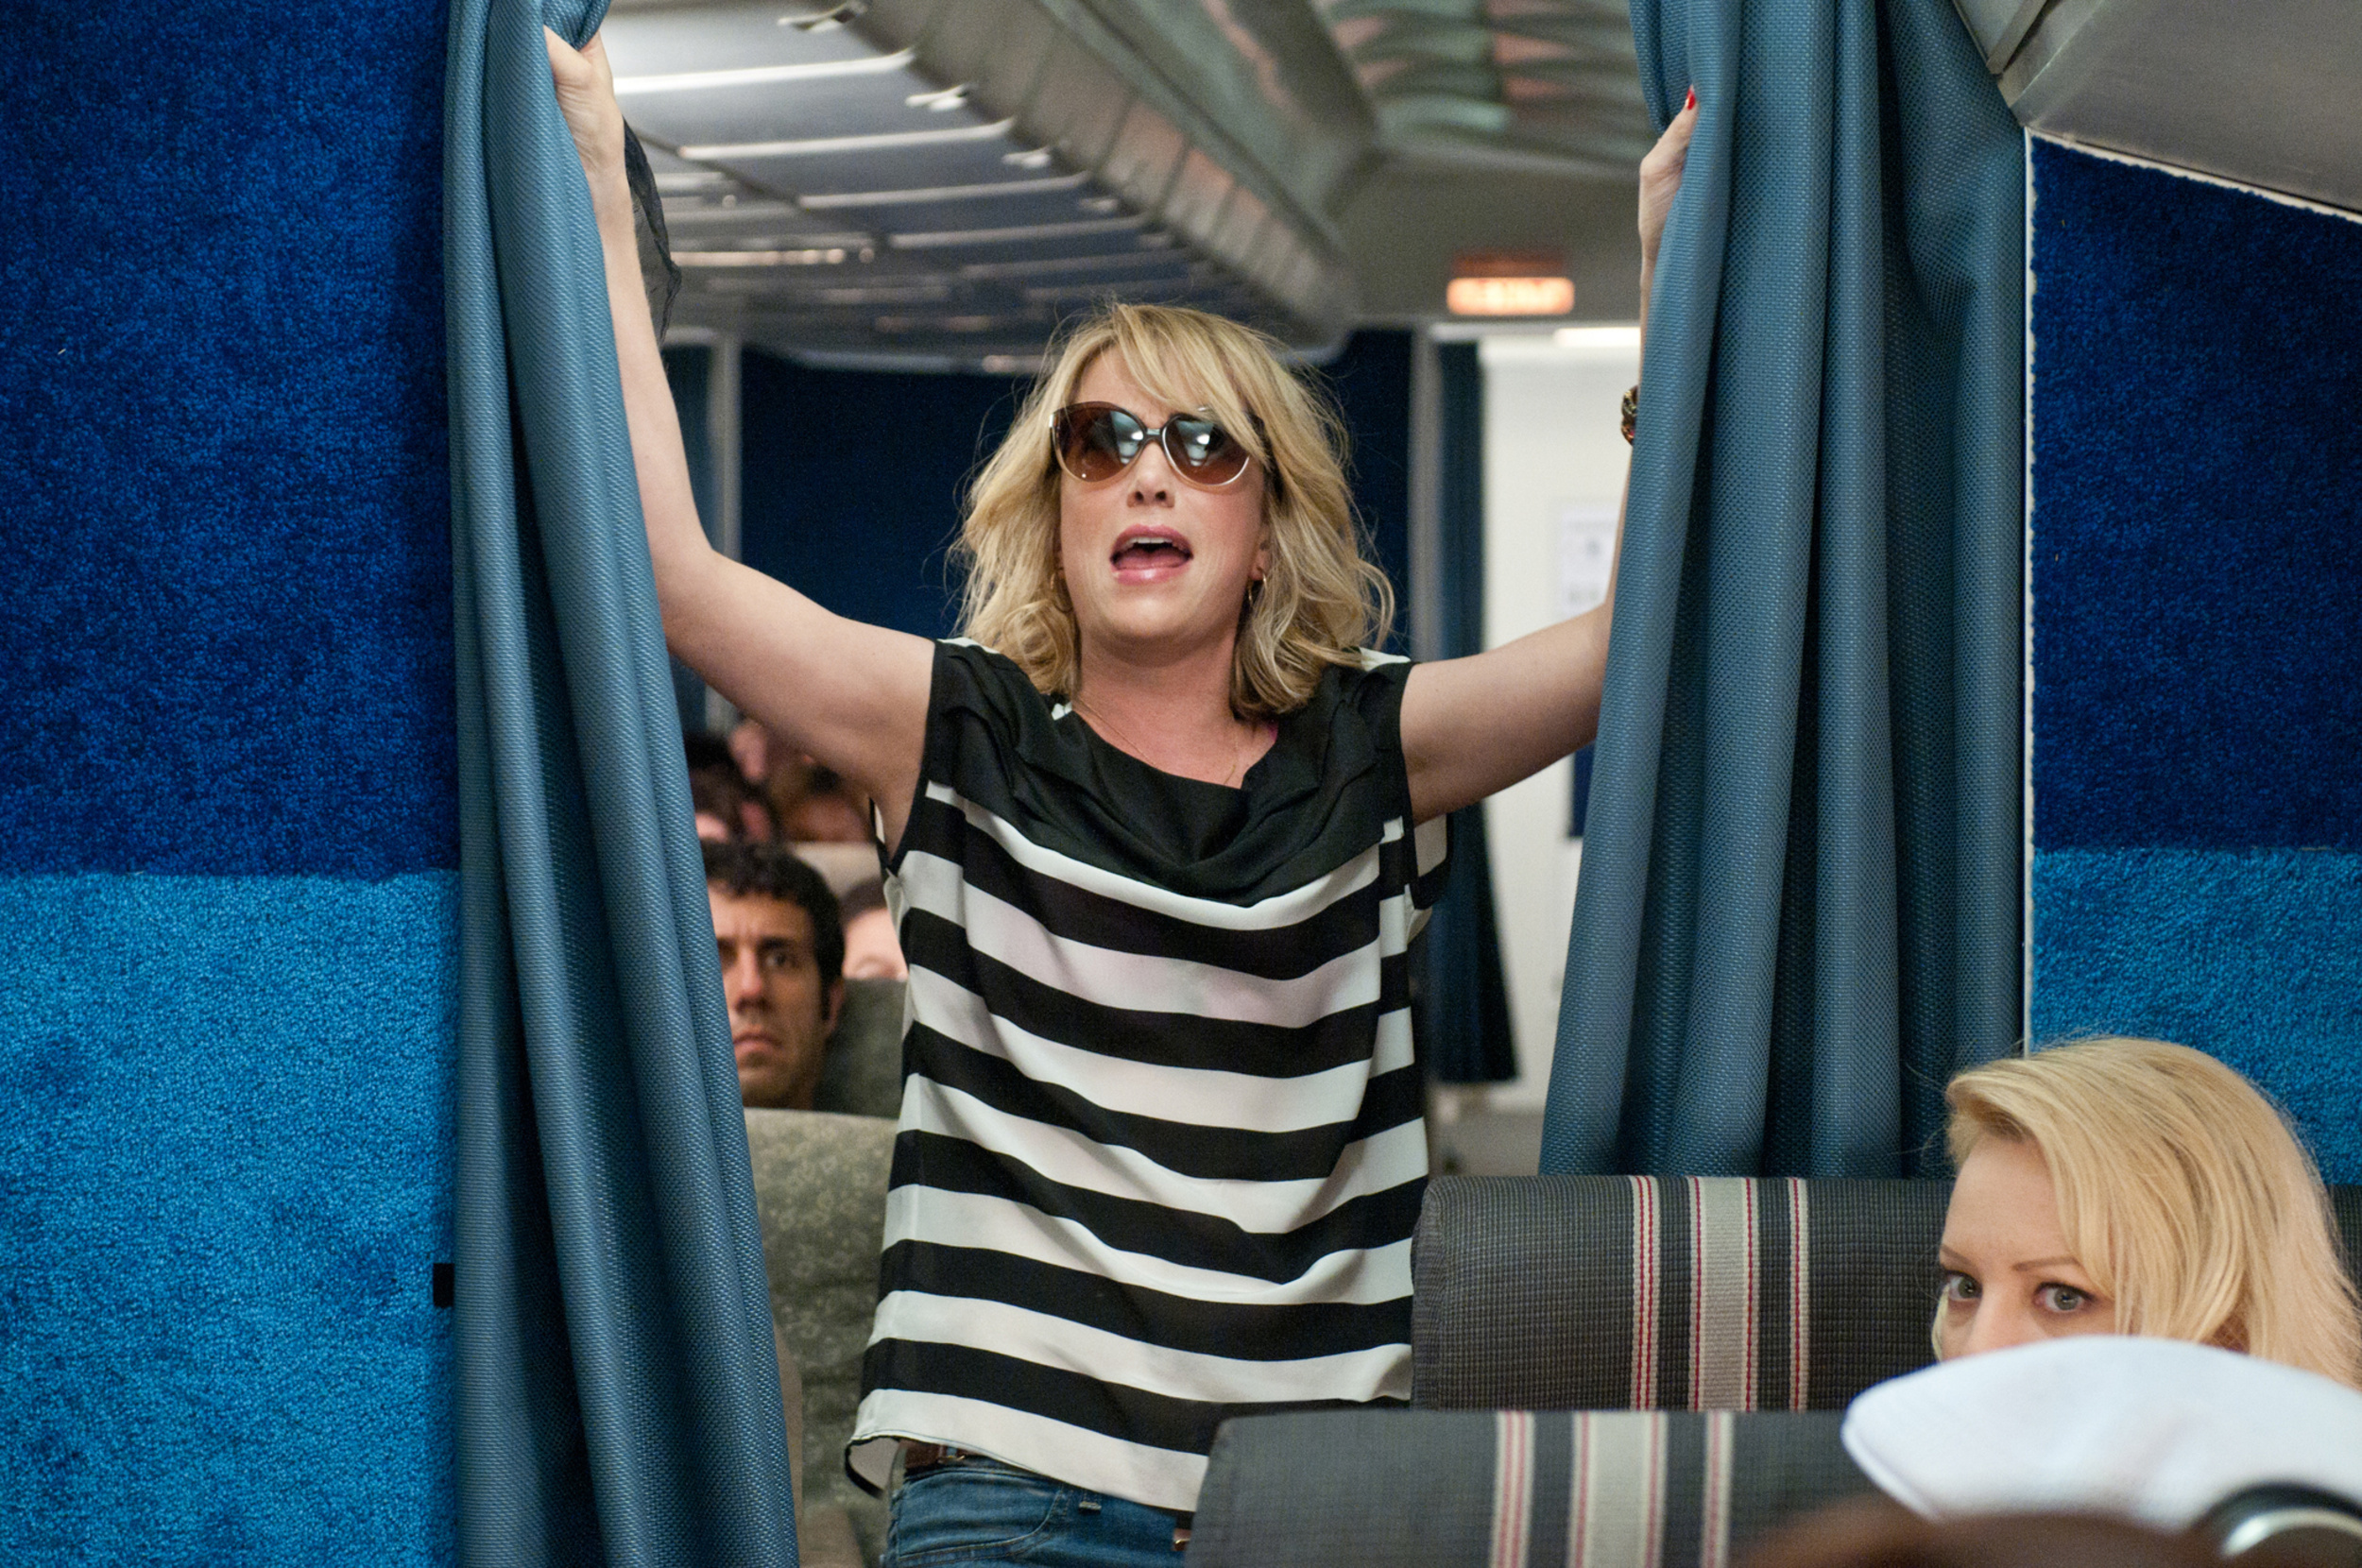 <p>Here is a “one memorable stretch on a plane in a film not largely about planes” entry. When you think of “Bridesmaids,” what set piece do you think of first? OK, now forget about the Brazilian restaurant experience and think about the second iconic comedy set piece from the beloved Kristen Wiig comedy. It’s when the whole crew is on that plane. Wiig’s character is drugged out. Melissa McCarthy seduces an air marshal. Good times.</p><p><a href='https://www.msn.com/en-us/community/channel/vid-cj9pqbr0vn9in2b6ddcd8sfgpfq6x6utp44fssrv6mc2gtybw0us'>Follow us on MSN to see more of our exclusive entertainment content.</a></p>